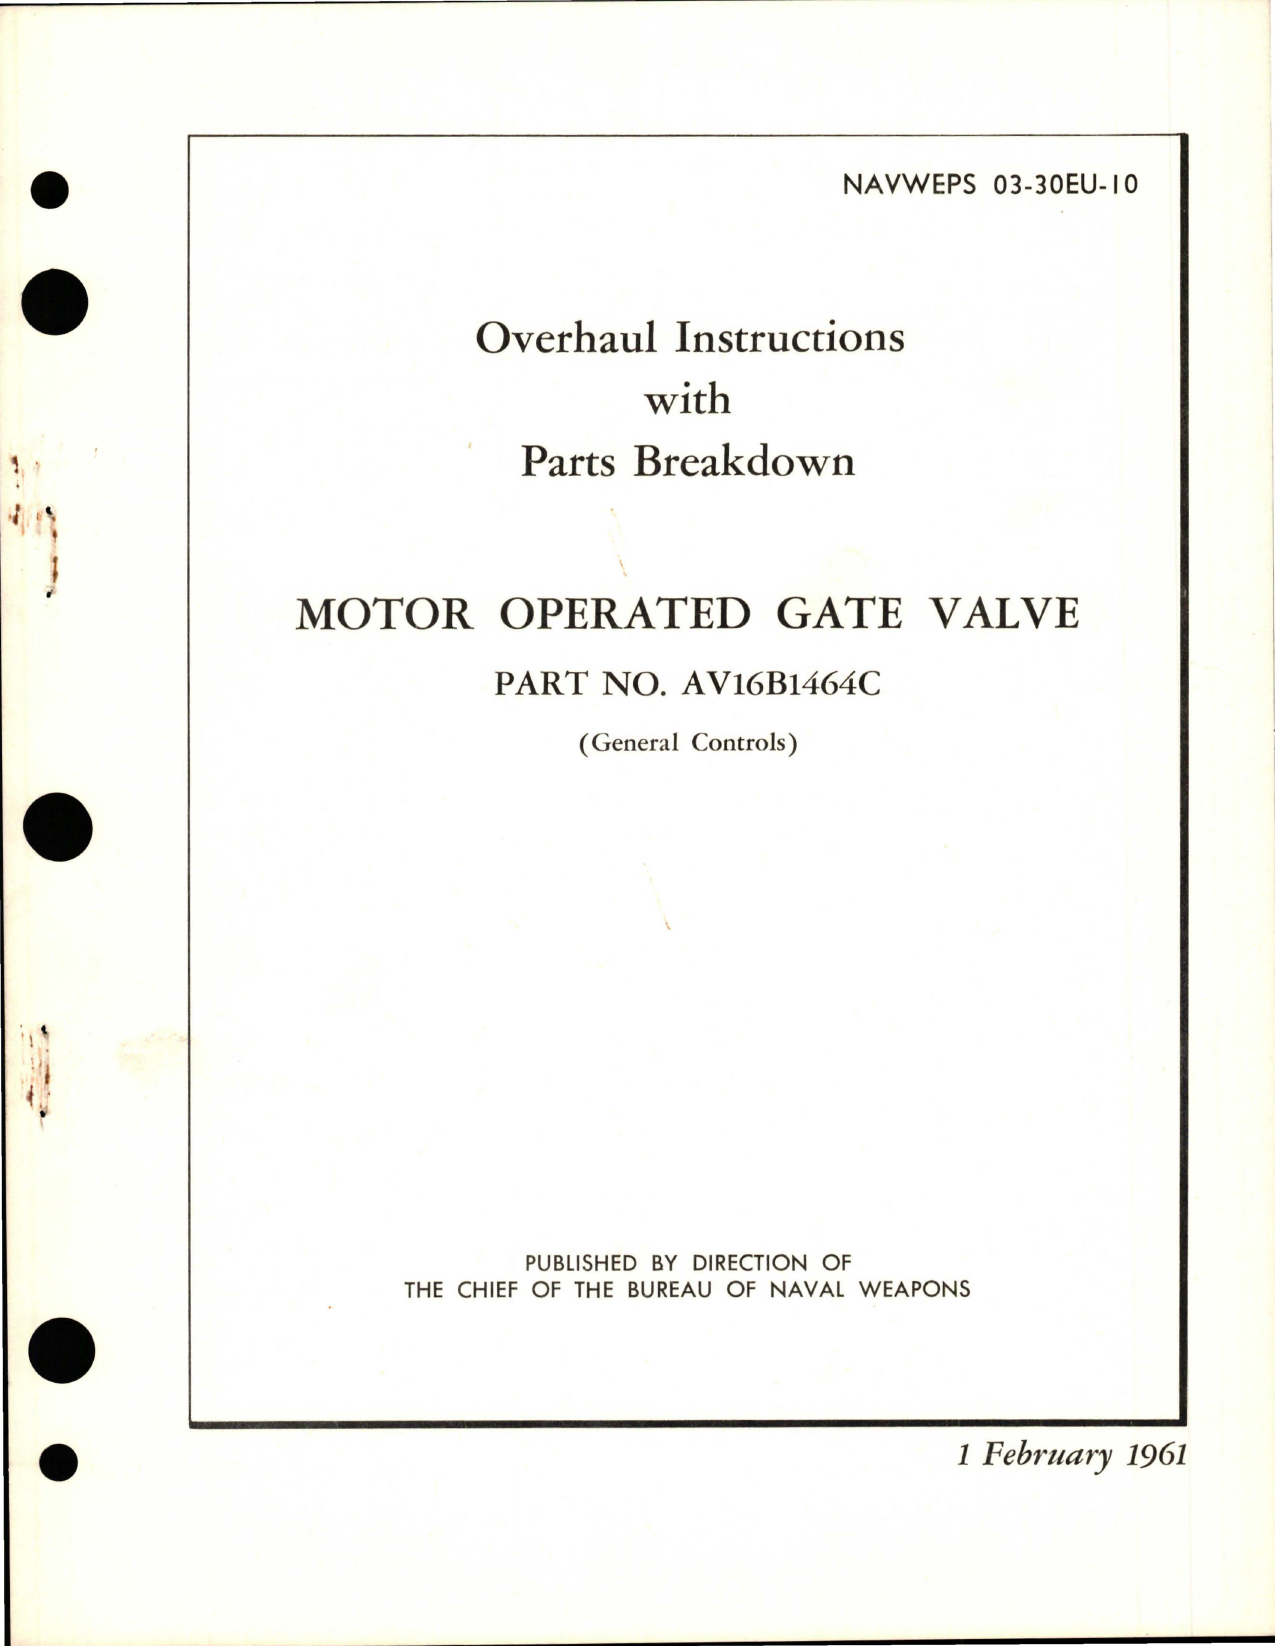 Sample page 1 from AirCorps Library document: Overhaul Instructions with Parts Breakdown for Motor Operated Gate Valve - Part AV16B1464C 